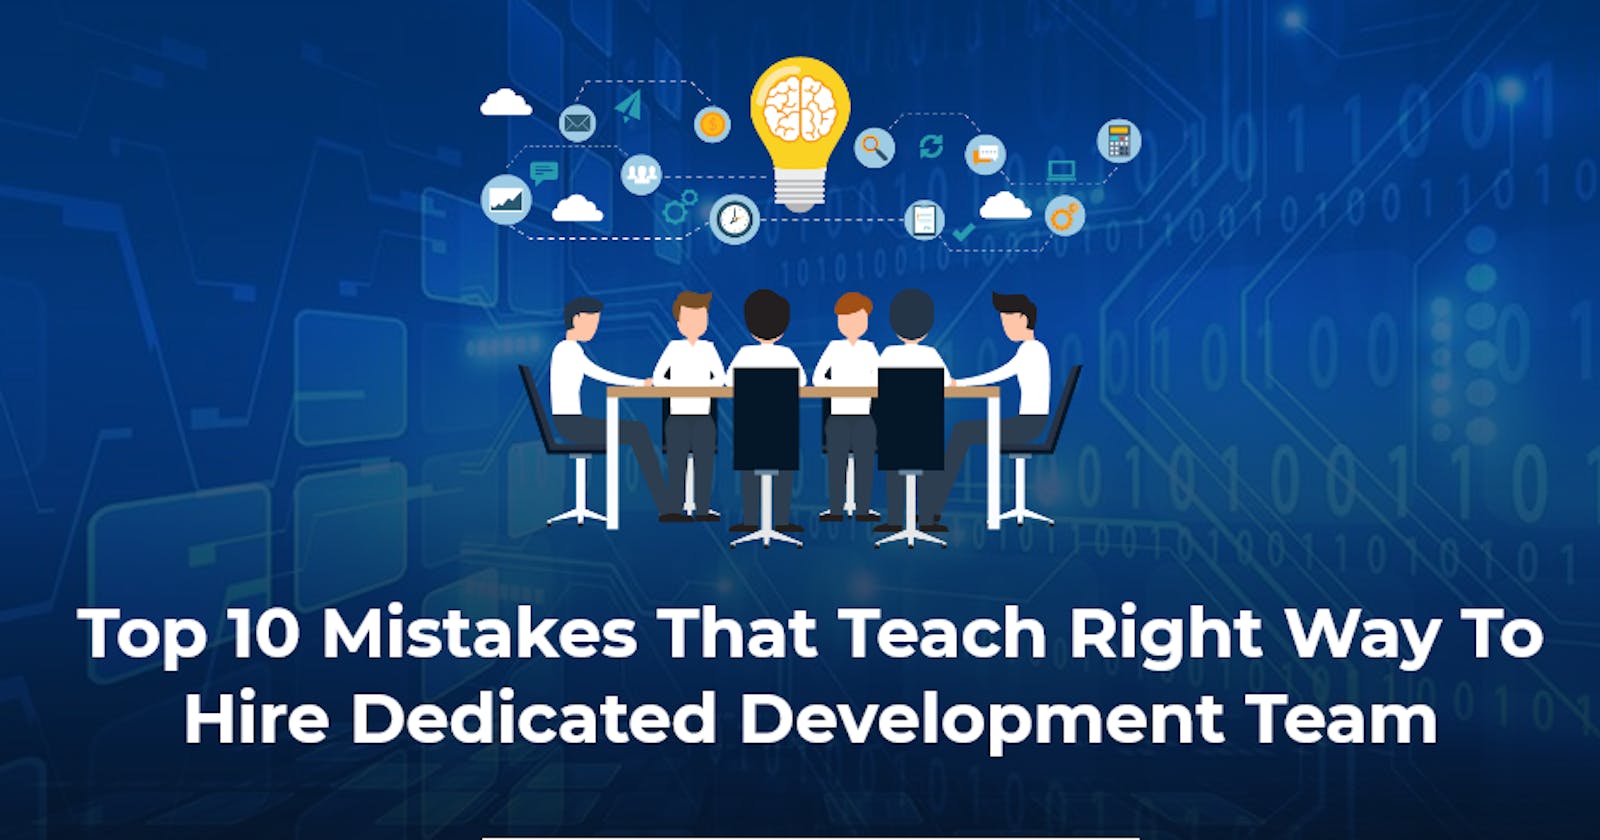 Mistakes to Avoid When Hiring a Dedicated Development Team